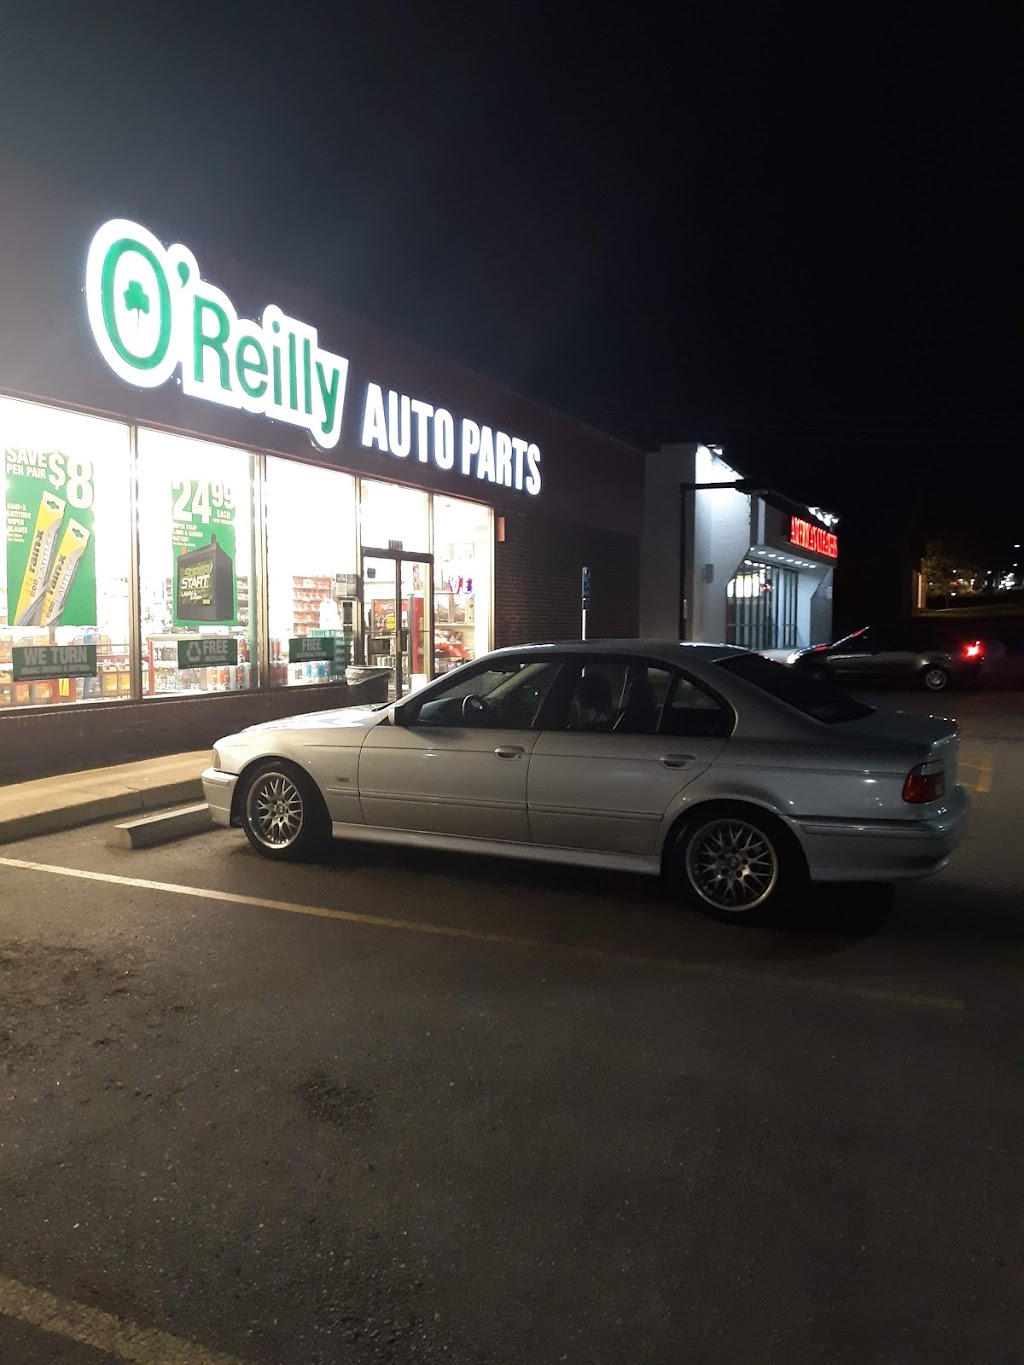 OReilly Auto Parts | 15360 Manchester Rd, Ellisville, MO 63011 | Phone: (636) 527-6740